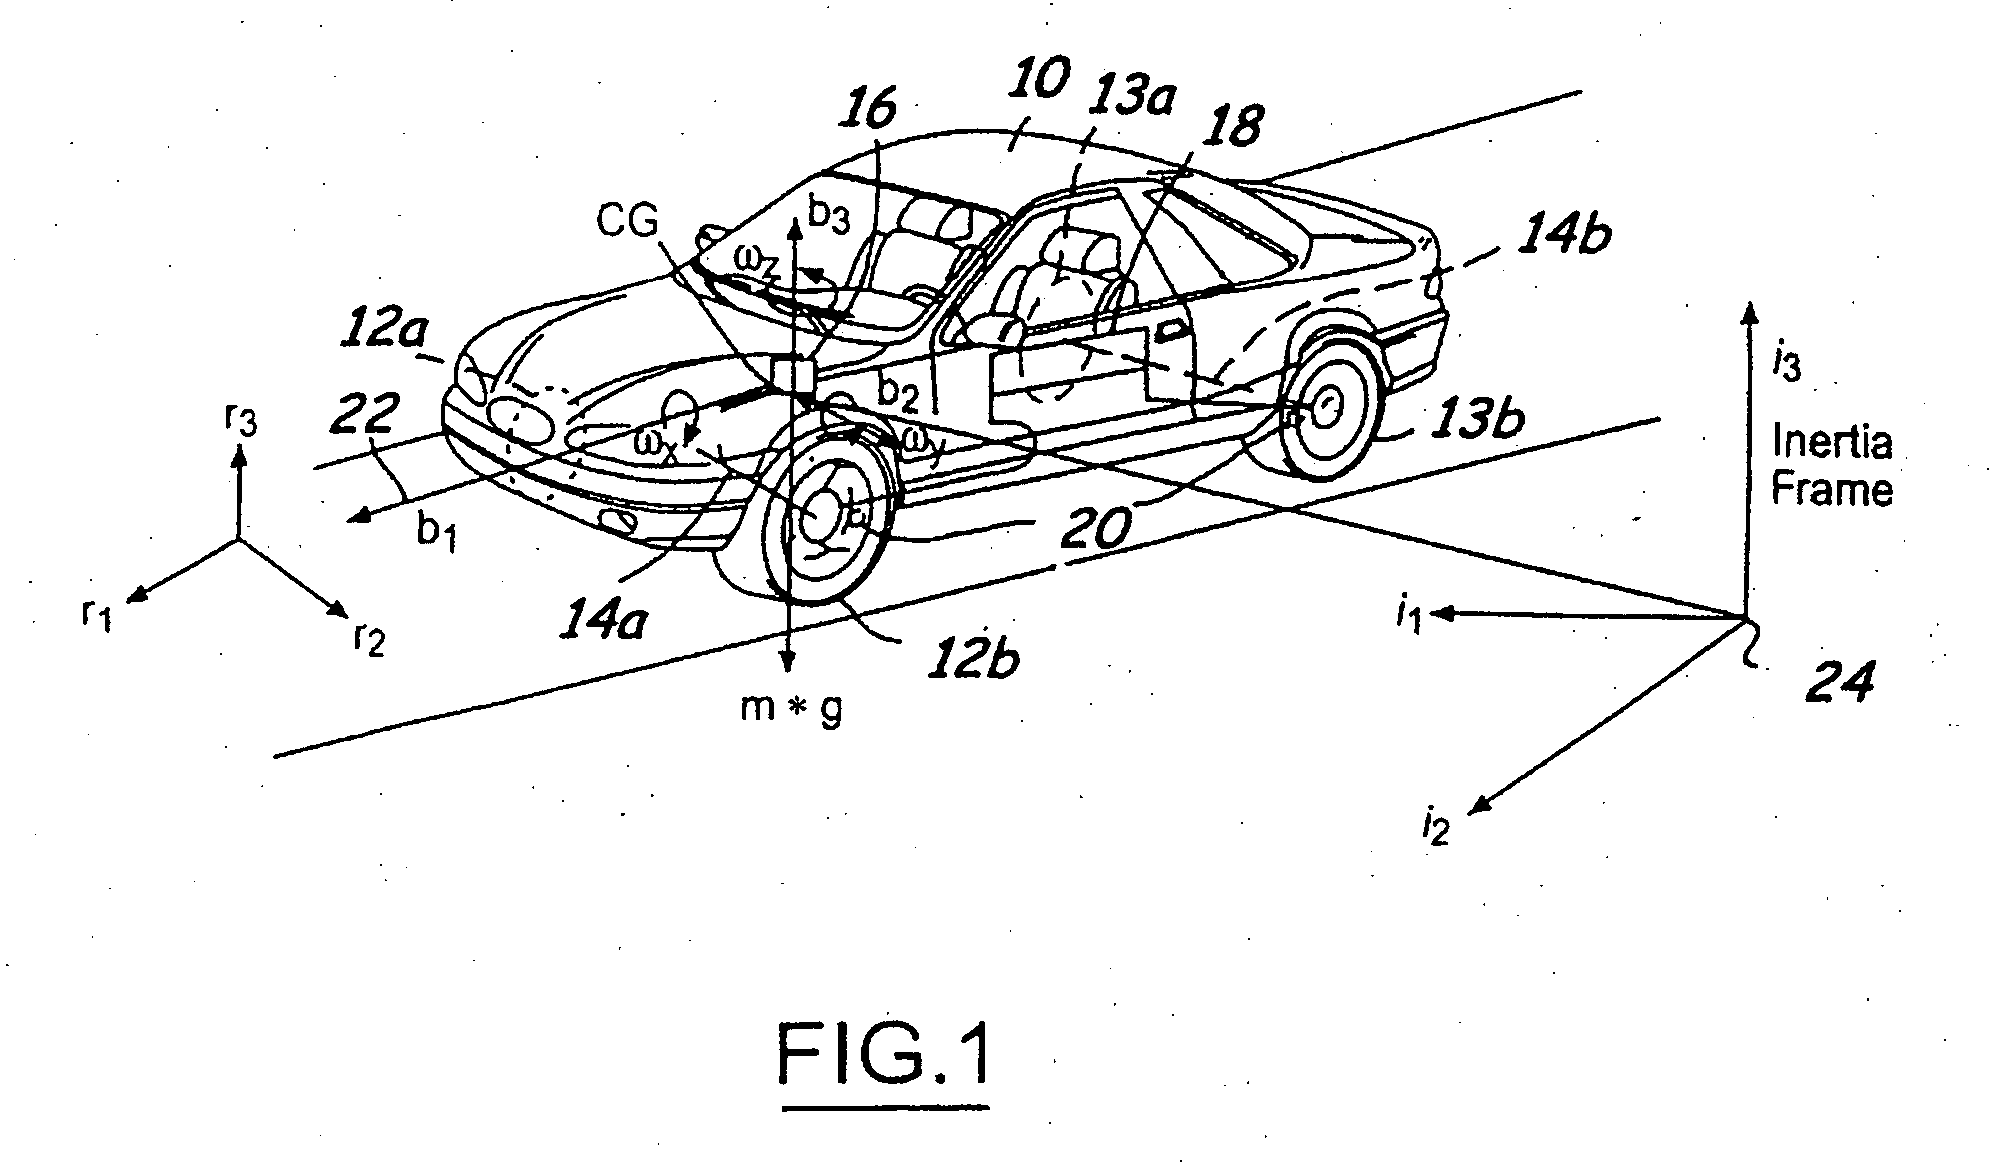 System and method for controlling a safety system of a vehicle in response to conditions sensed by tire sensors related applications